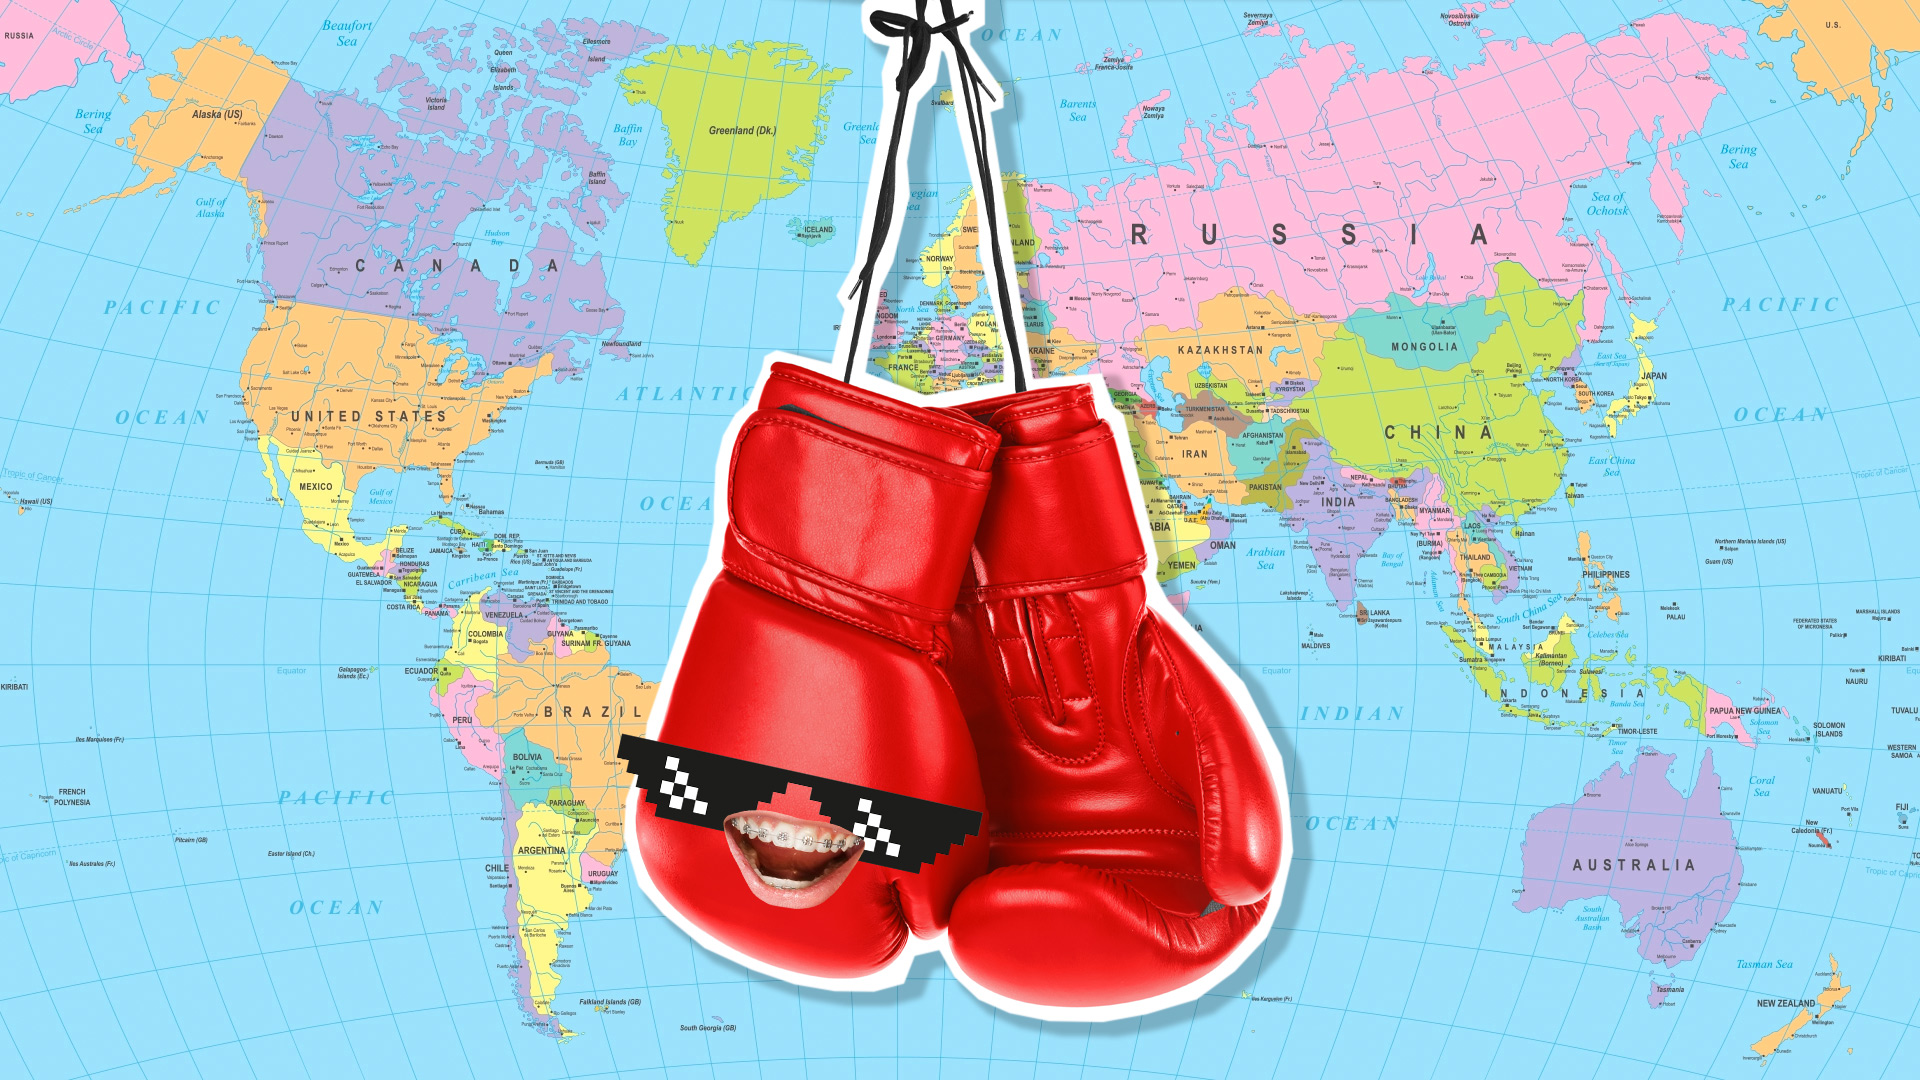 A map of the world with a pair of boxing gloves